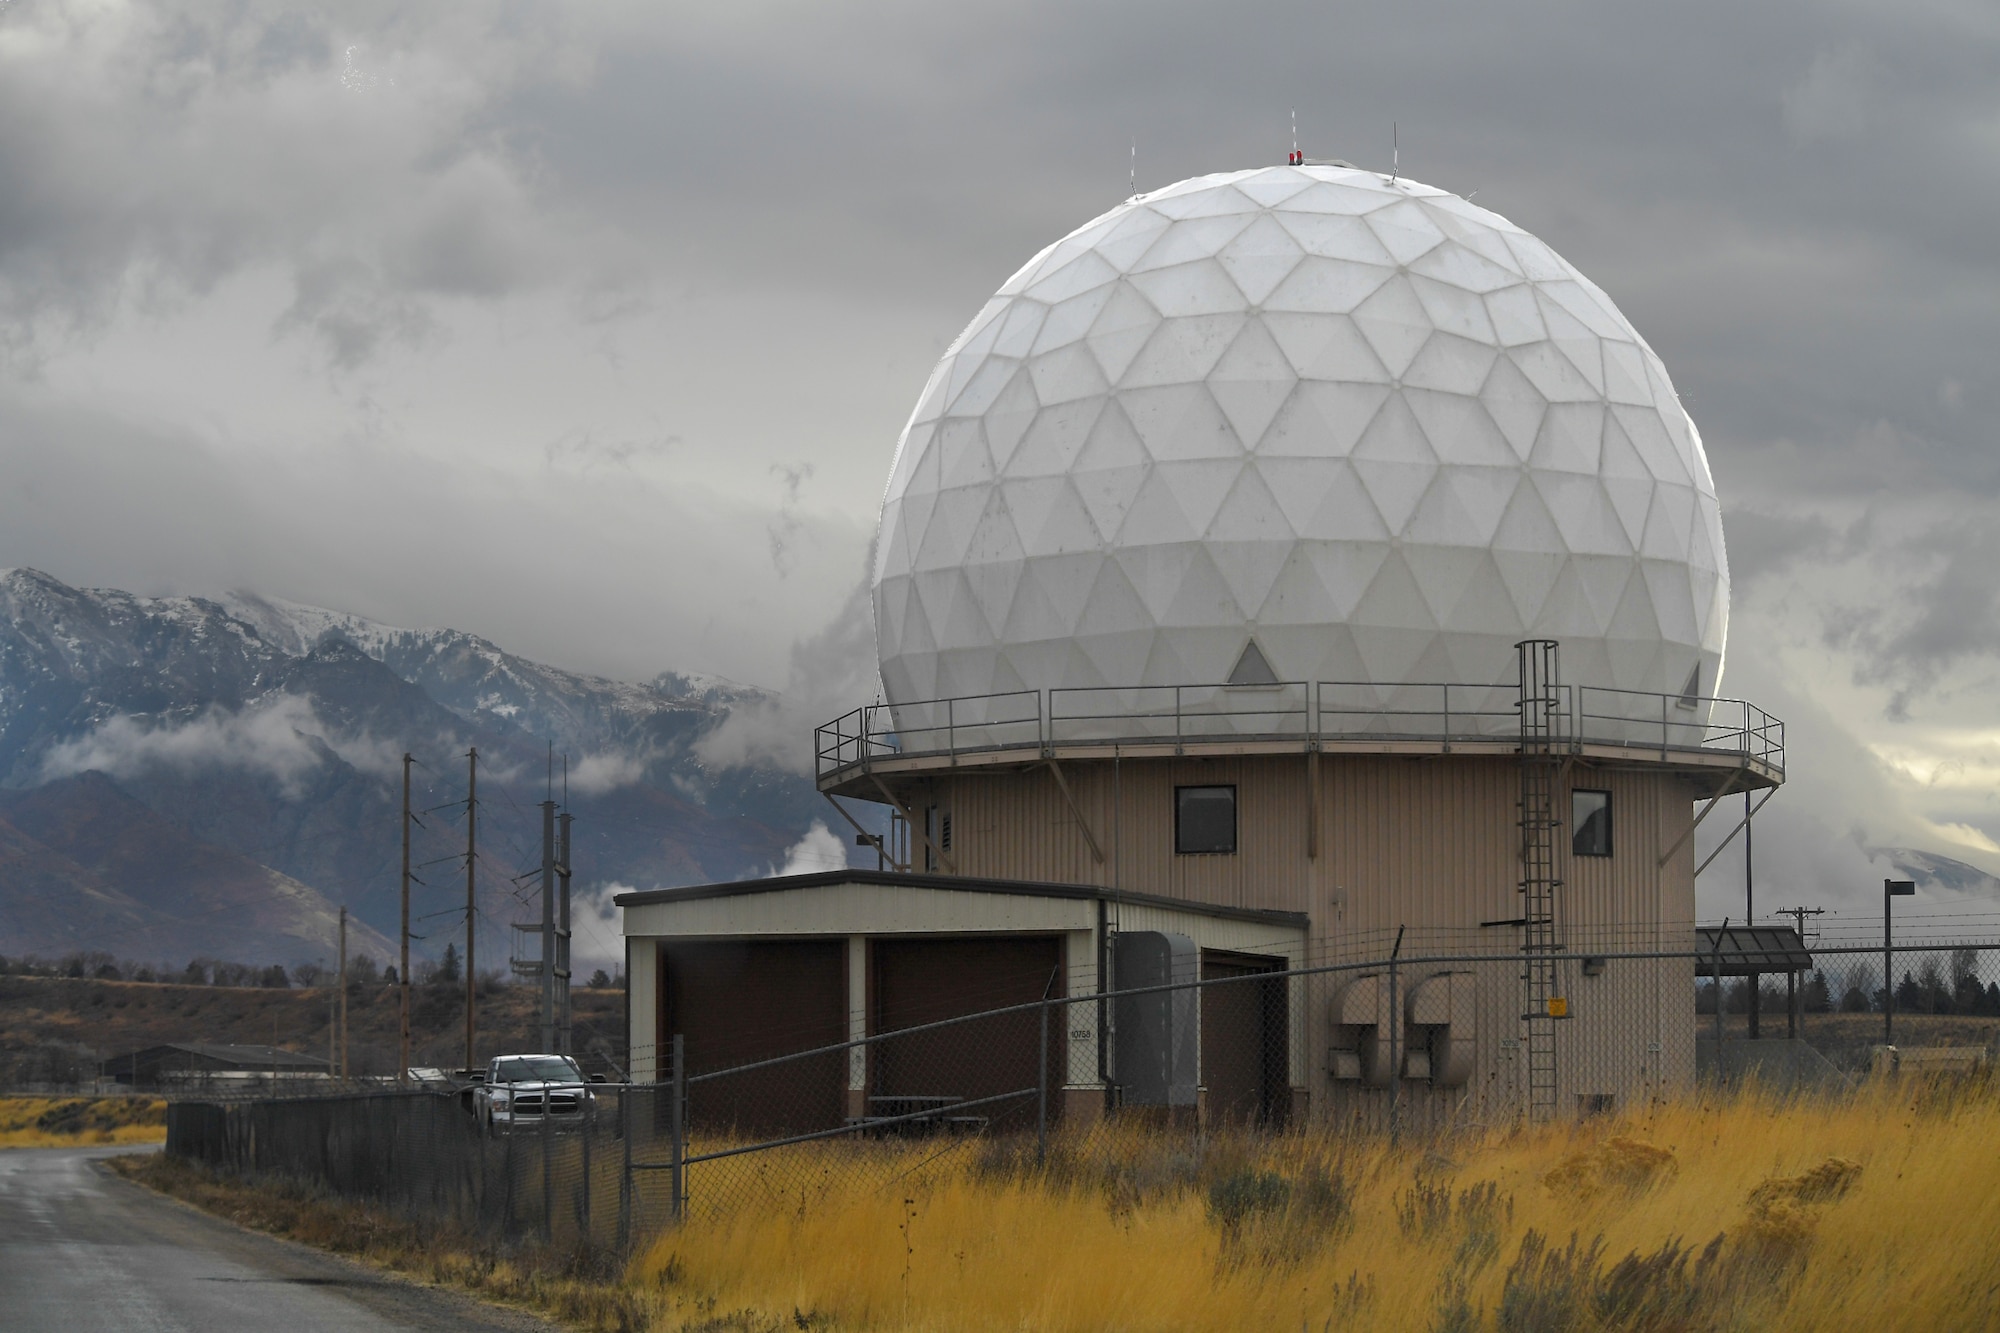 The AN/FPS-117 engineering facility at Hill Air Force Base with the snow-capped Wasatch Mountains in the background.